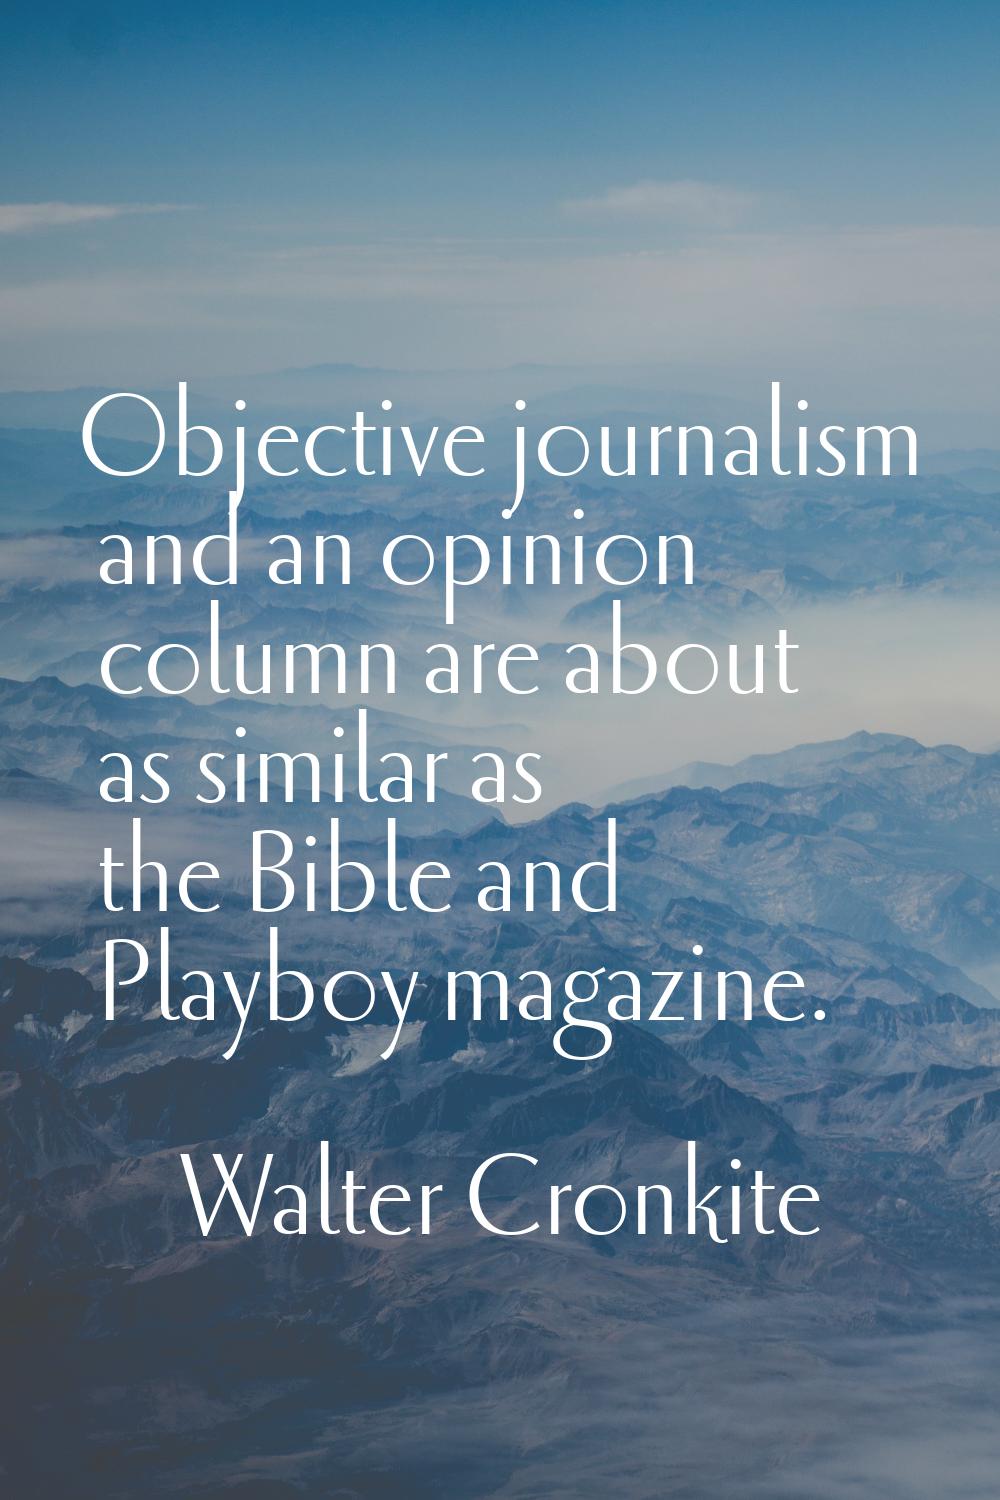 Objective journalism and an opinion column are about as similar as the Bible and Playboy magazine.